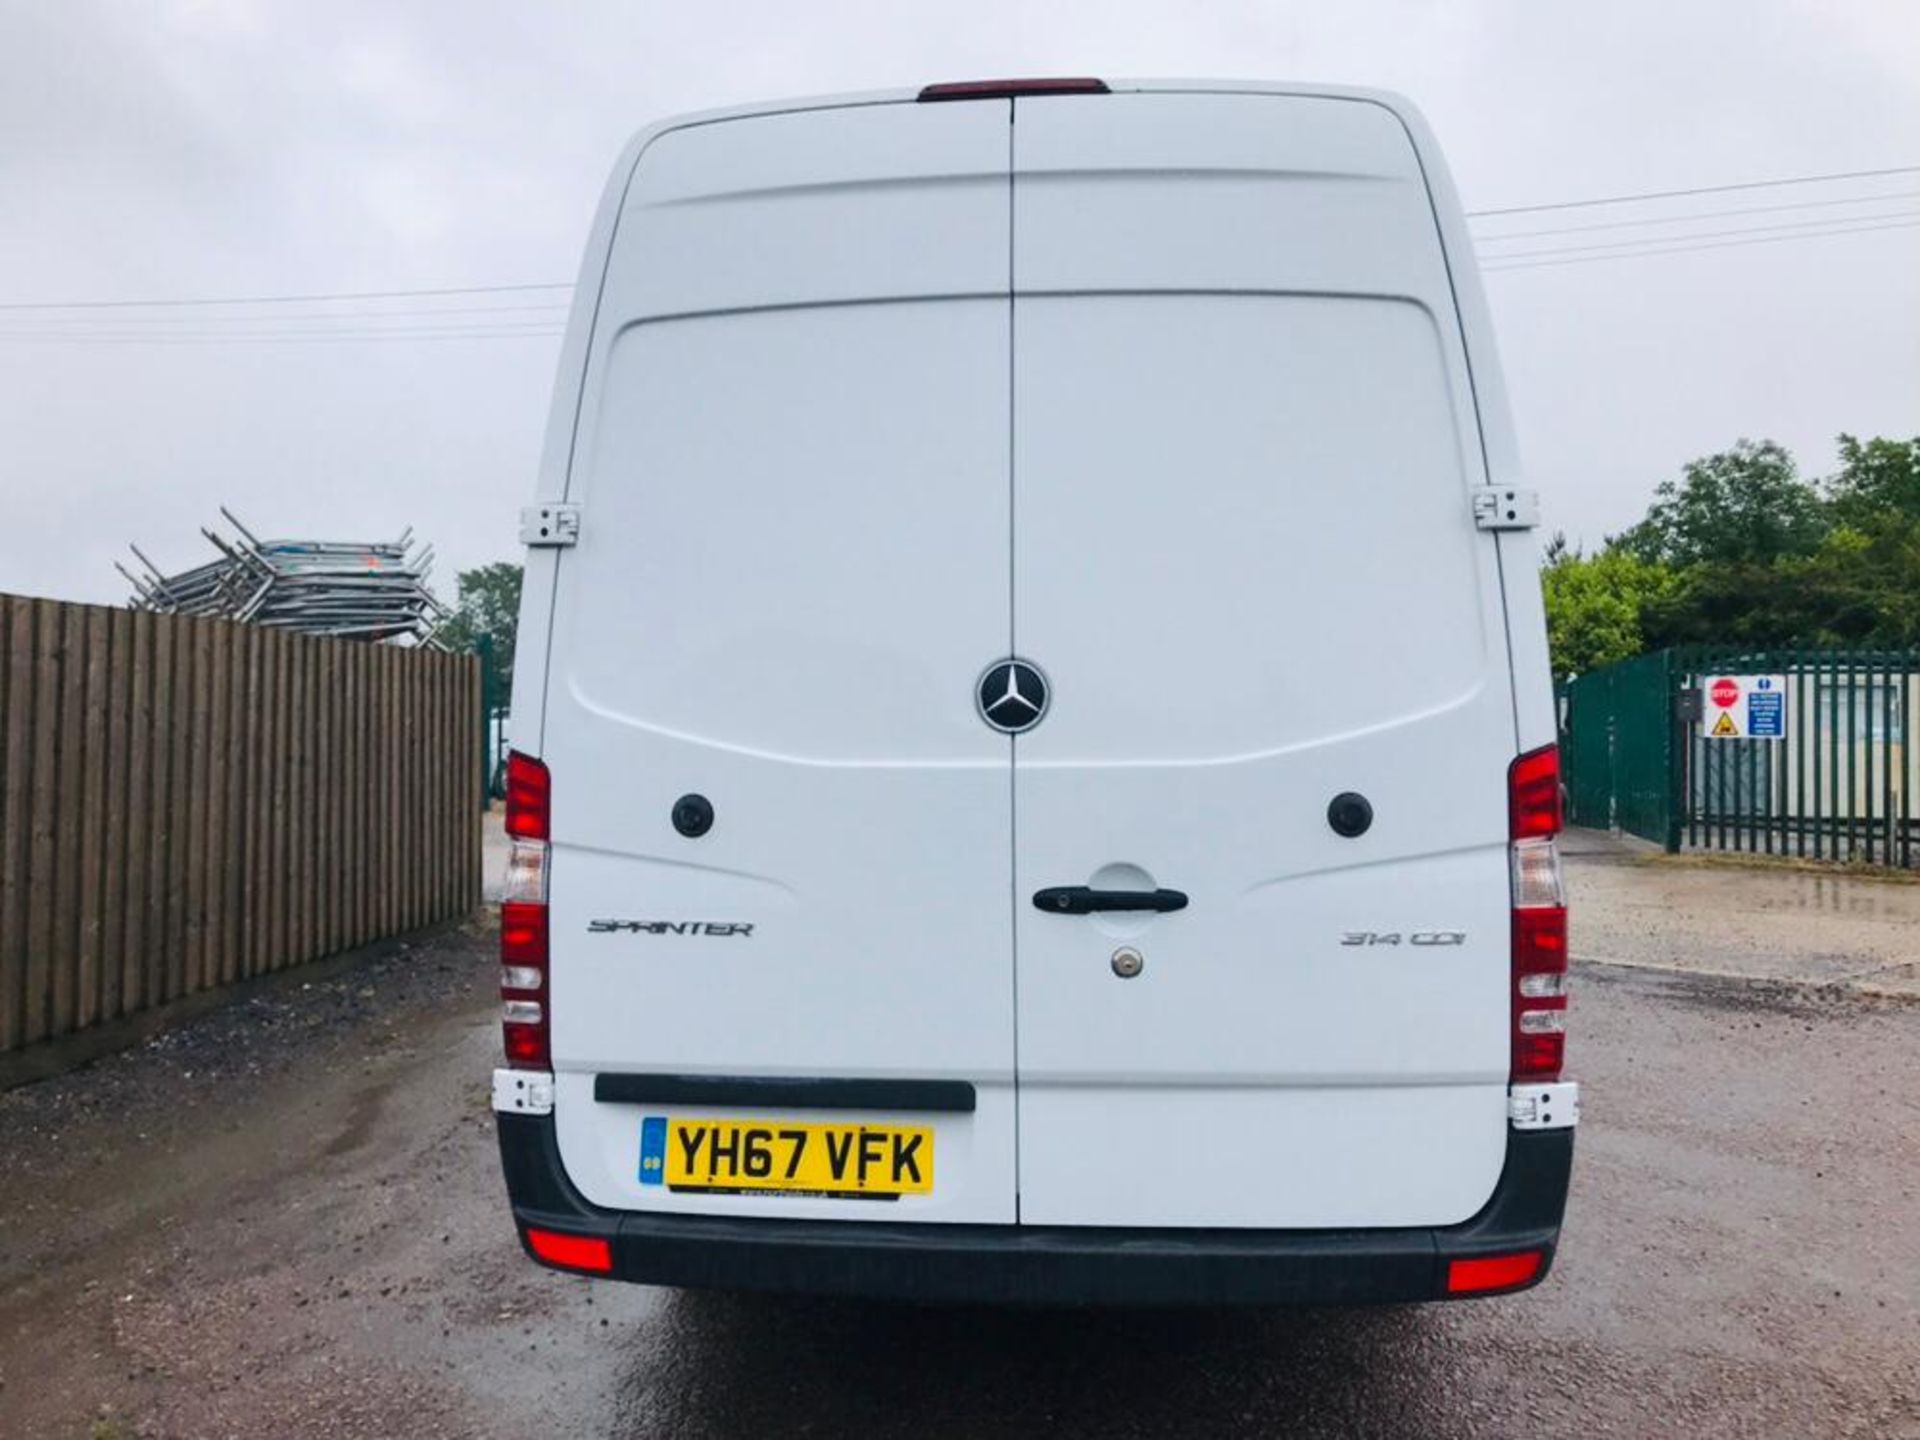 MERCEDES SPRINTER 314CDI "LWB" 4.2MTR - HIGH TOP - 2018 MODEL - 1 KEEPER - ONLY 44K MILES - WOW!!! - Image 6 of 19